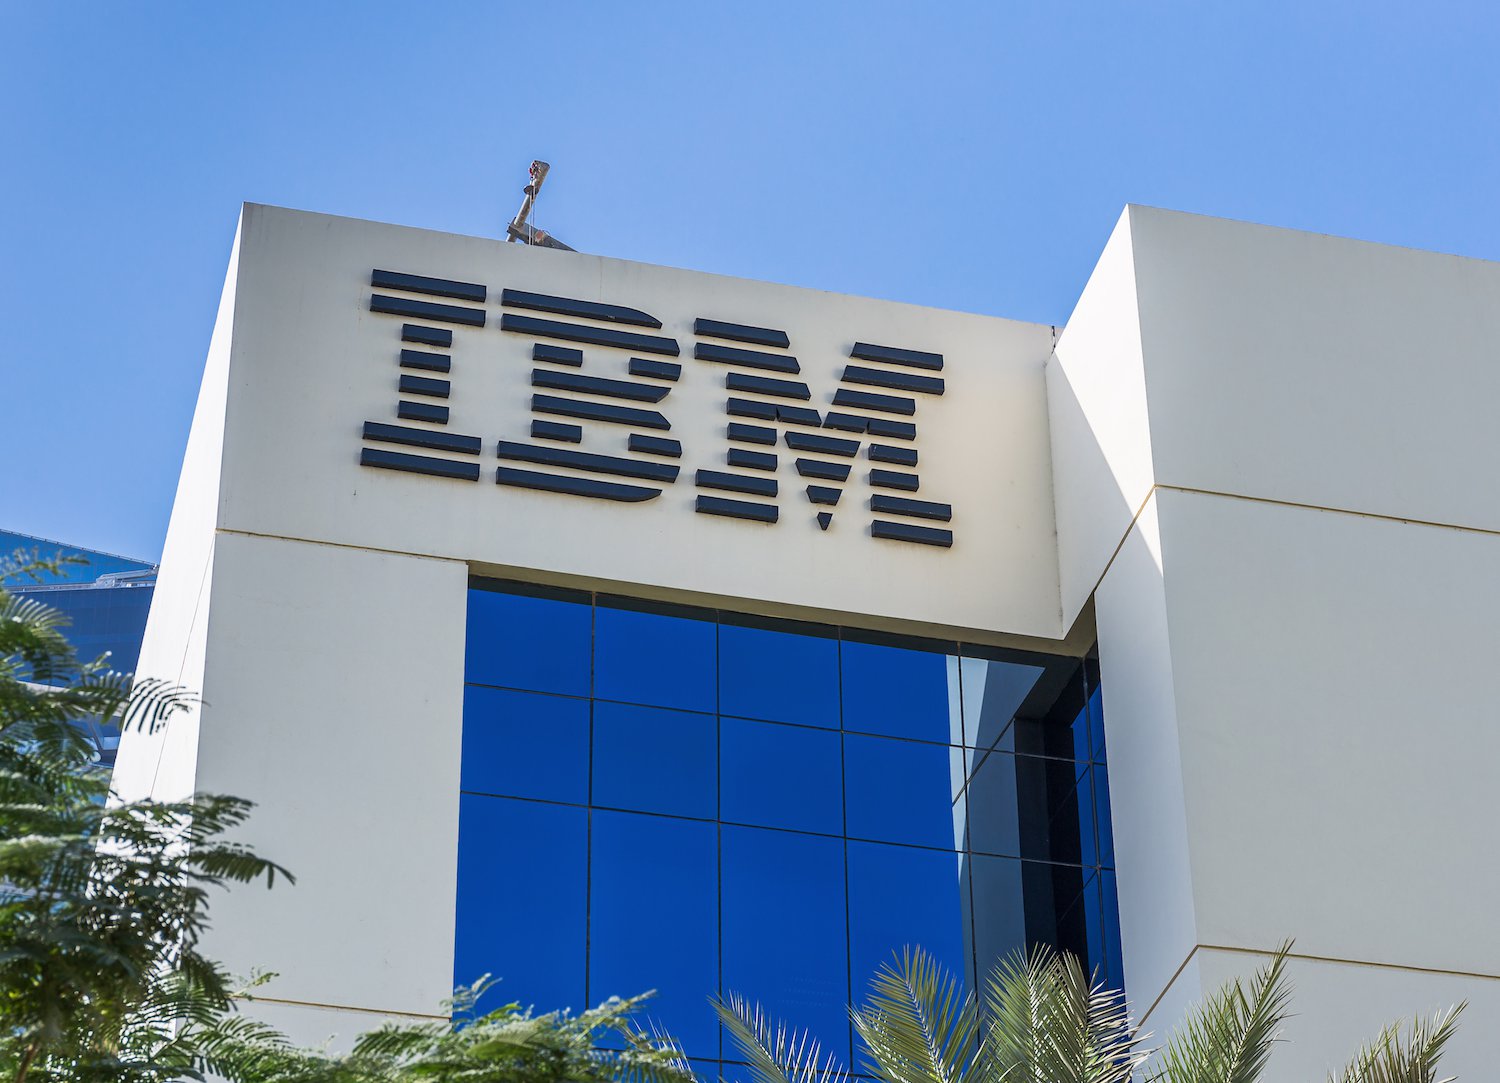 IBM Says Blockchain Can Power ‘Open Scientific Research’ In New Patent Filing